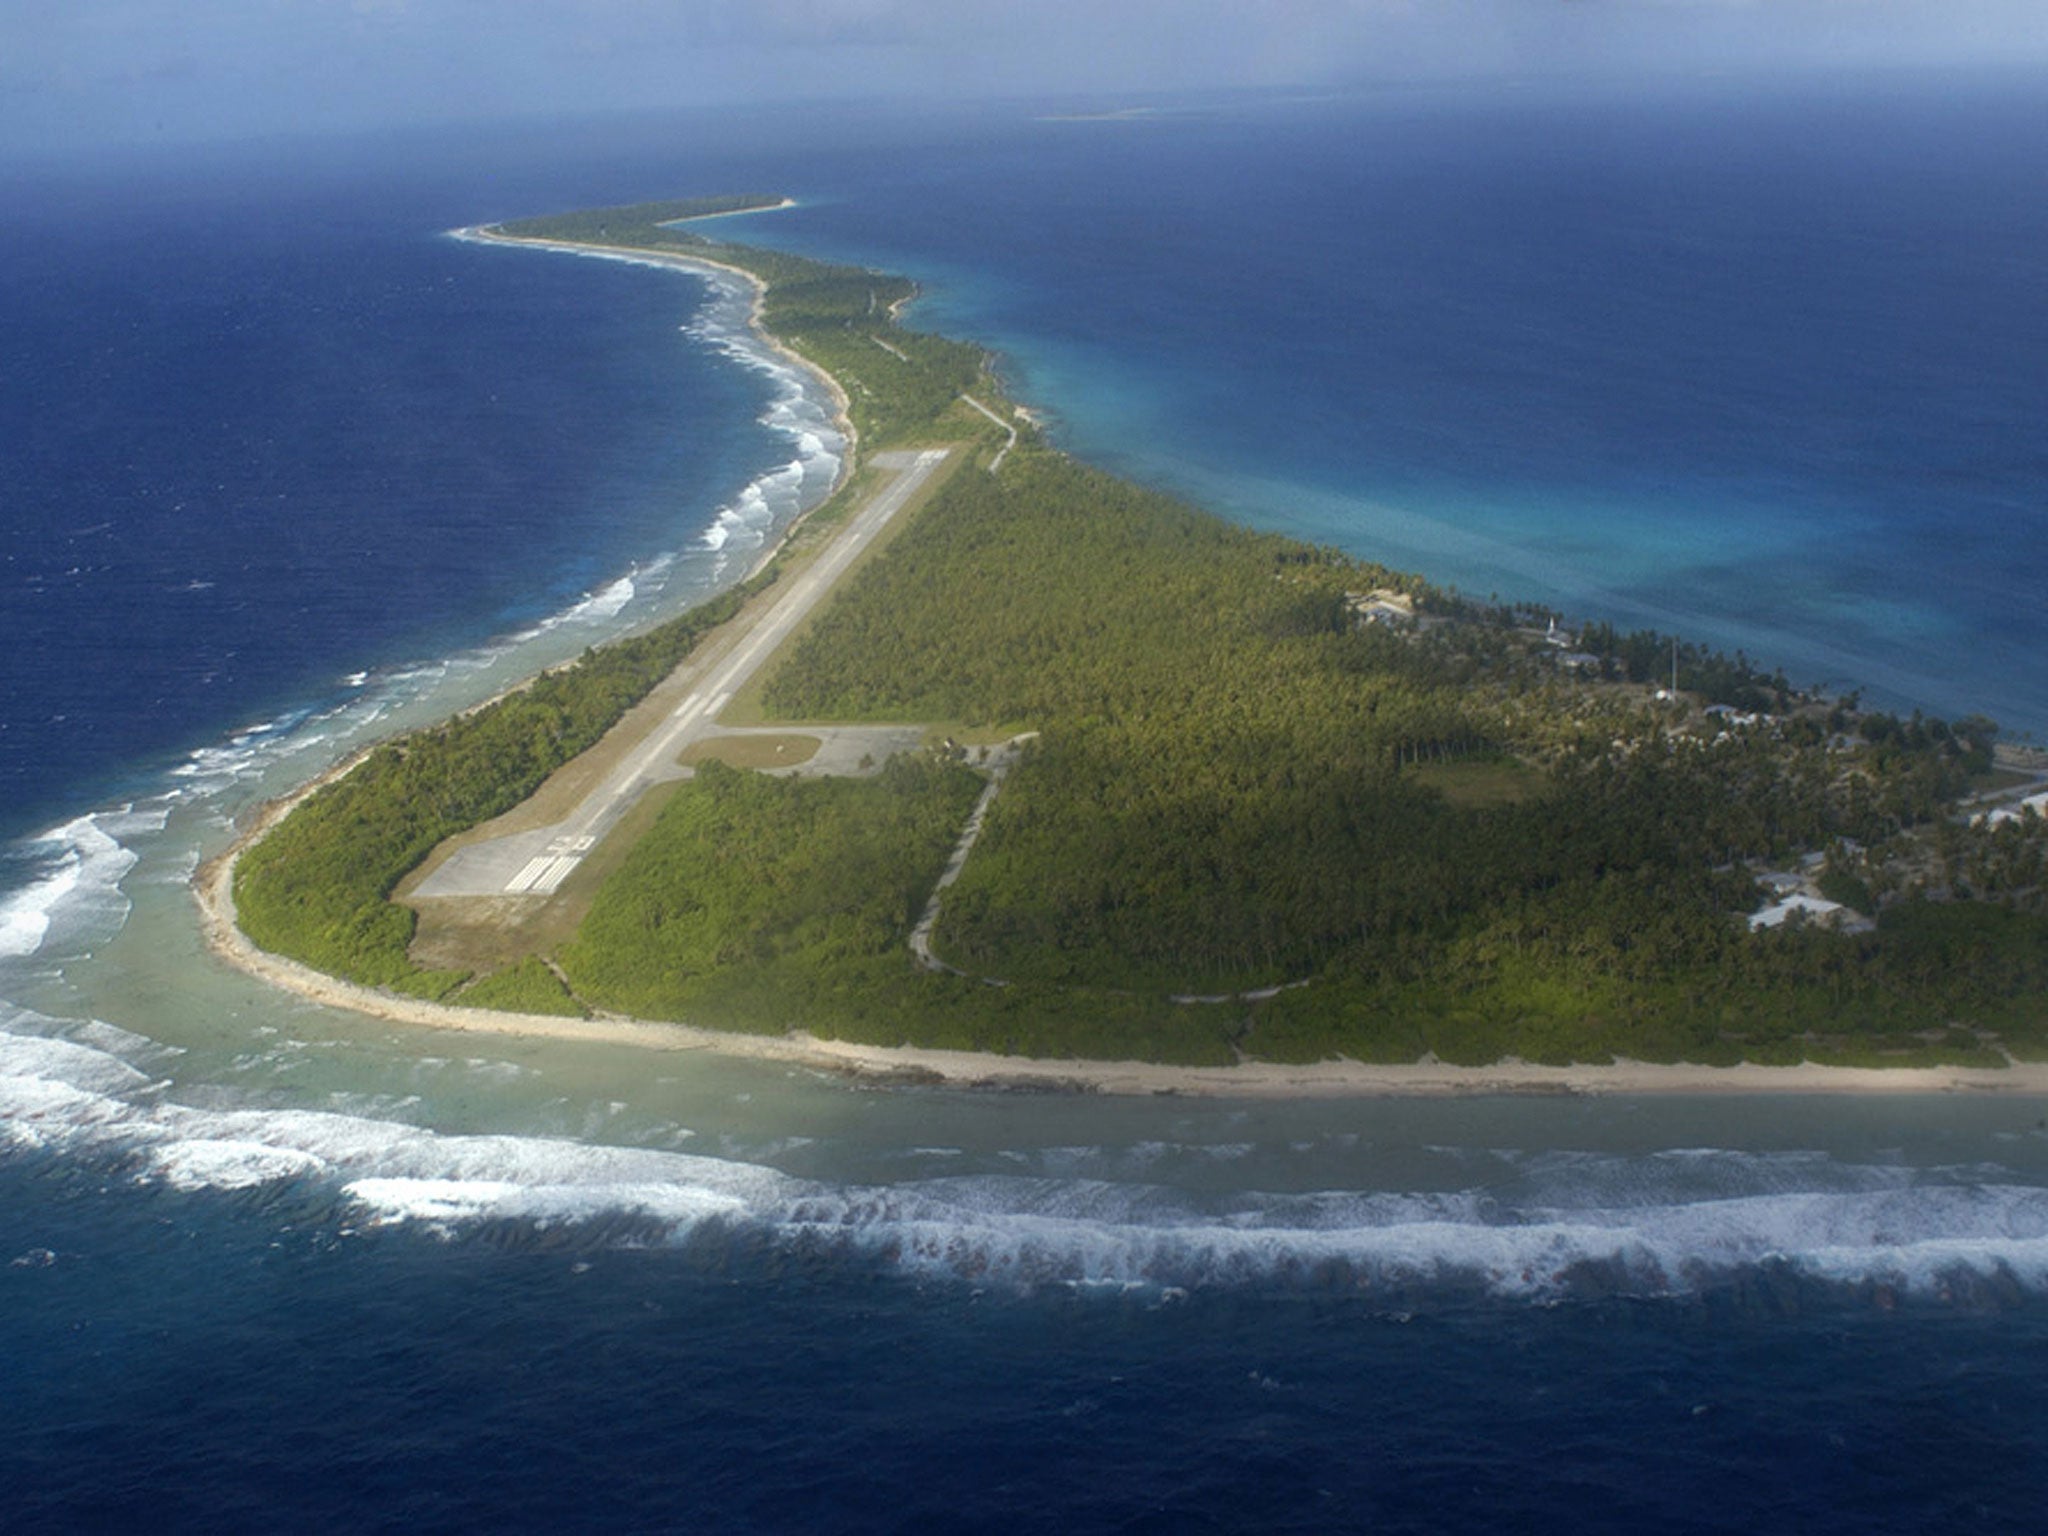 The low-lying coral atolls that make up the Marshall Islands are at risk from climate change